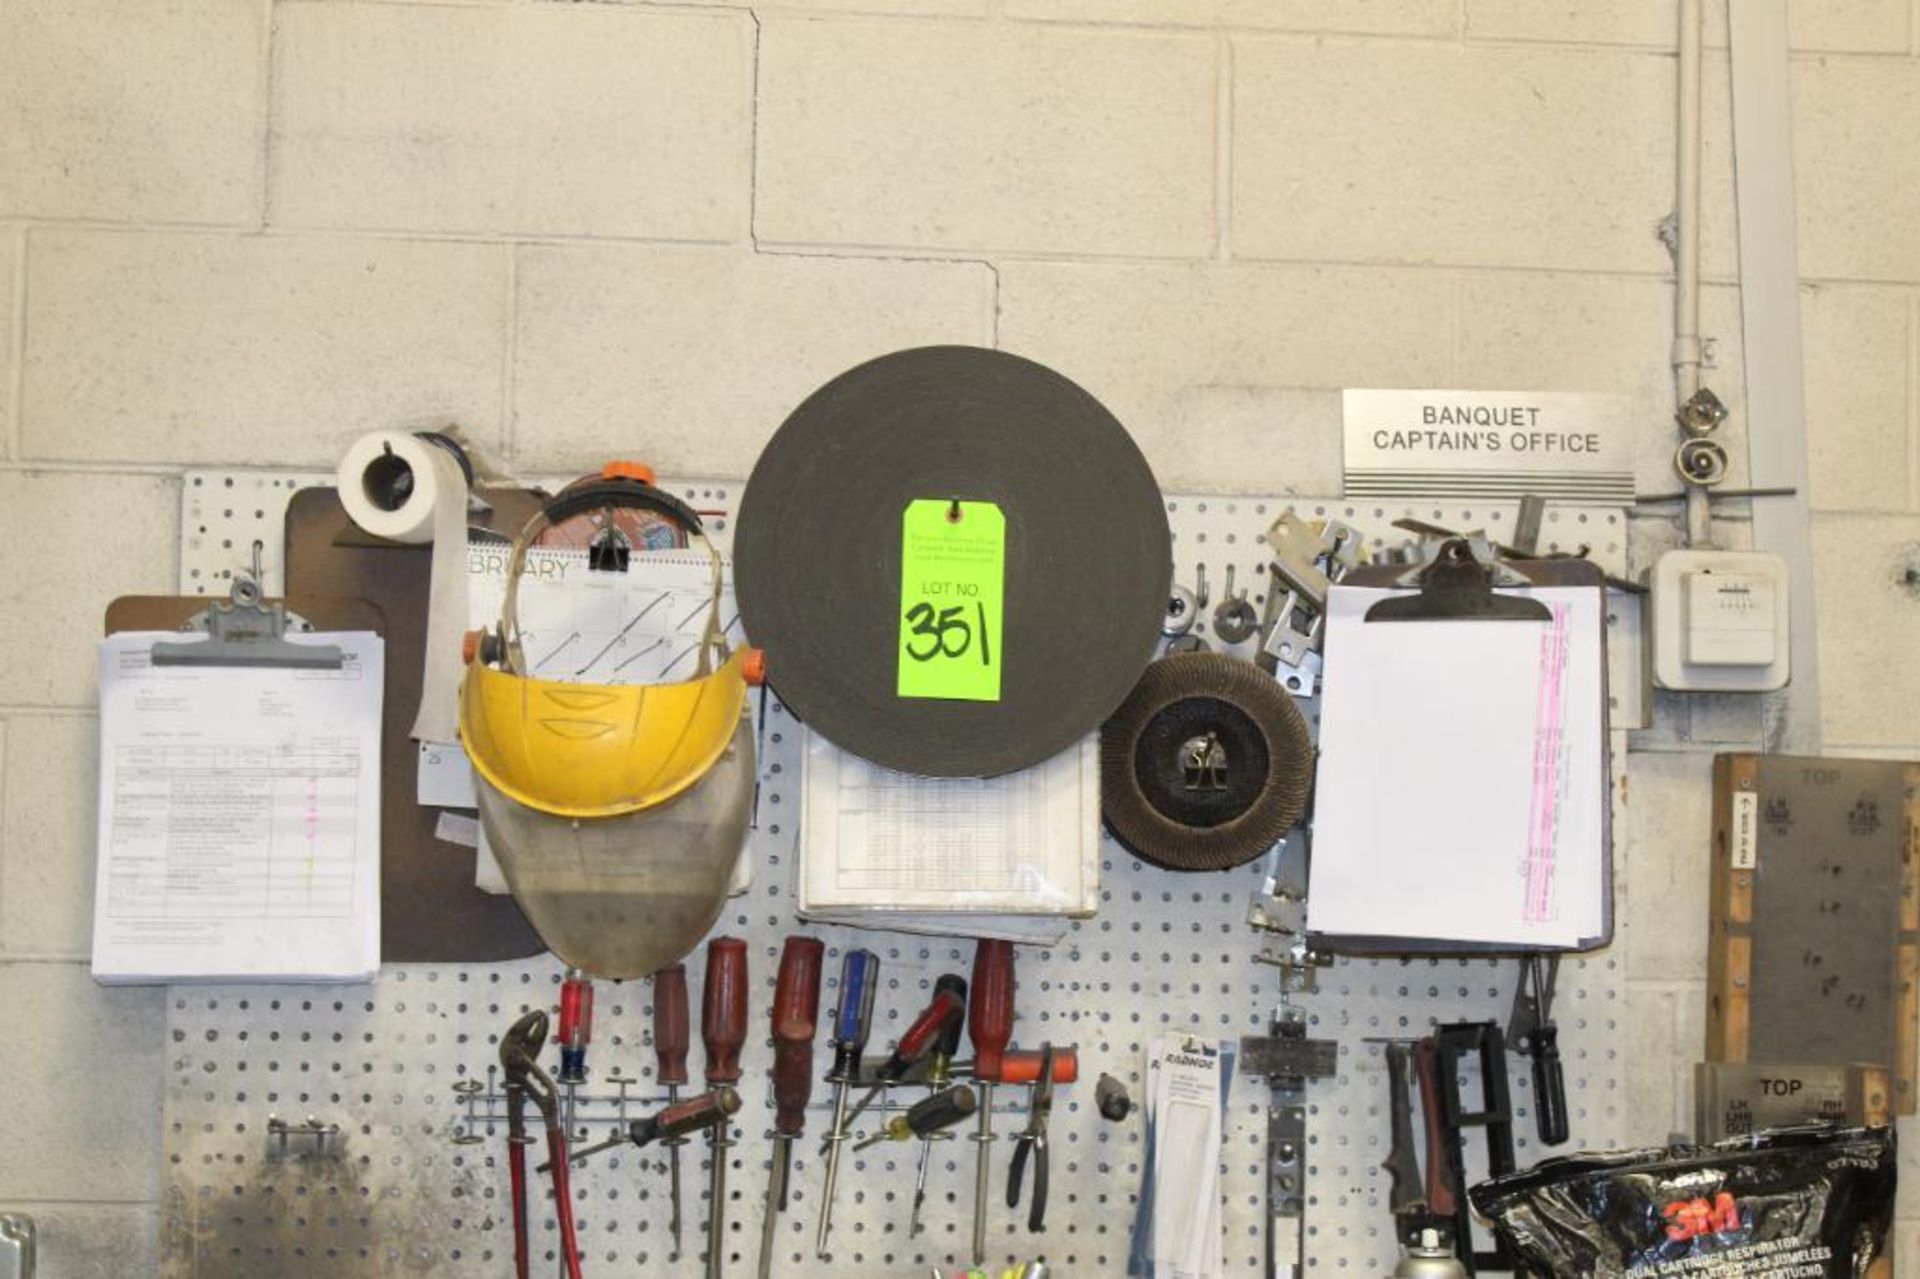 Contents of Work Bench to Inlcude Hand Tools, Holesaws, Tape Measures and Brackets - Image 2 of 10